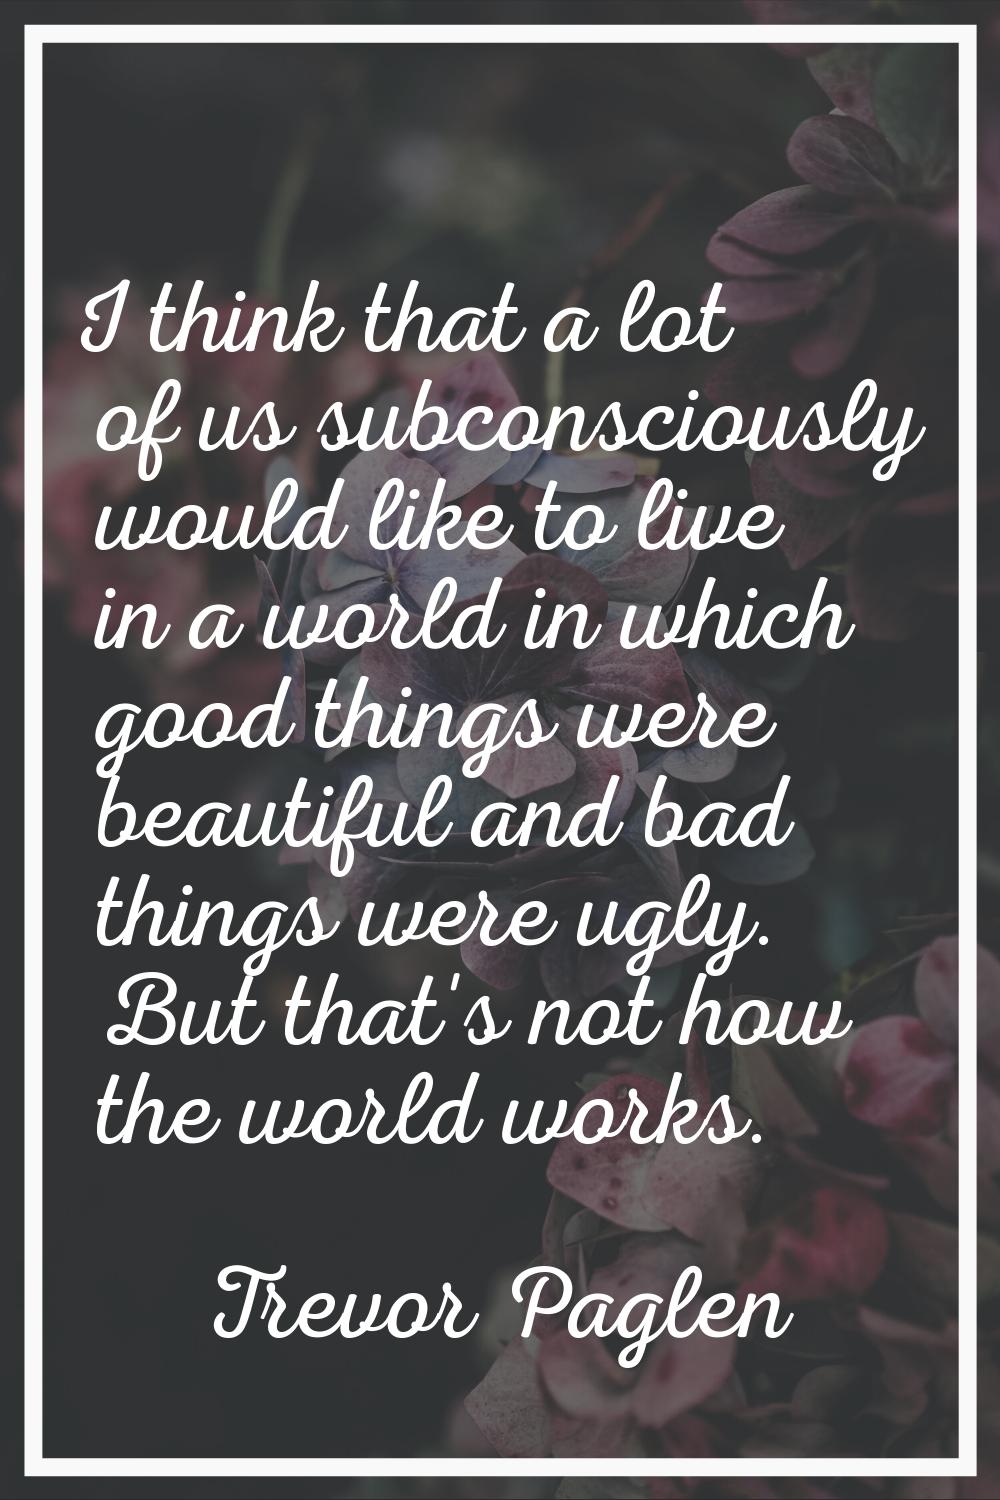 I think that a lot of us subconsciously would like to live in a world in which good things were bea